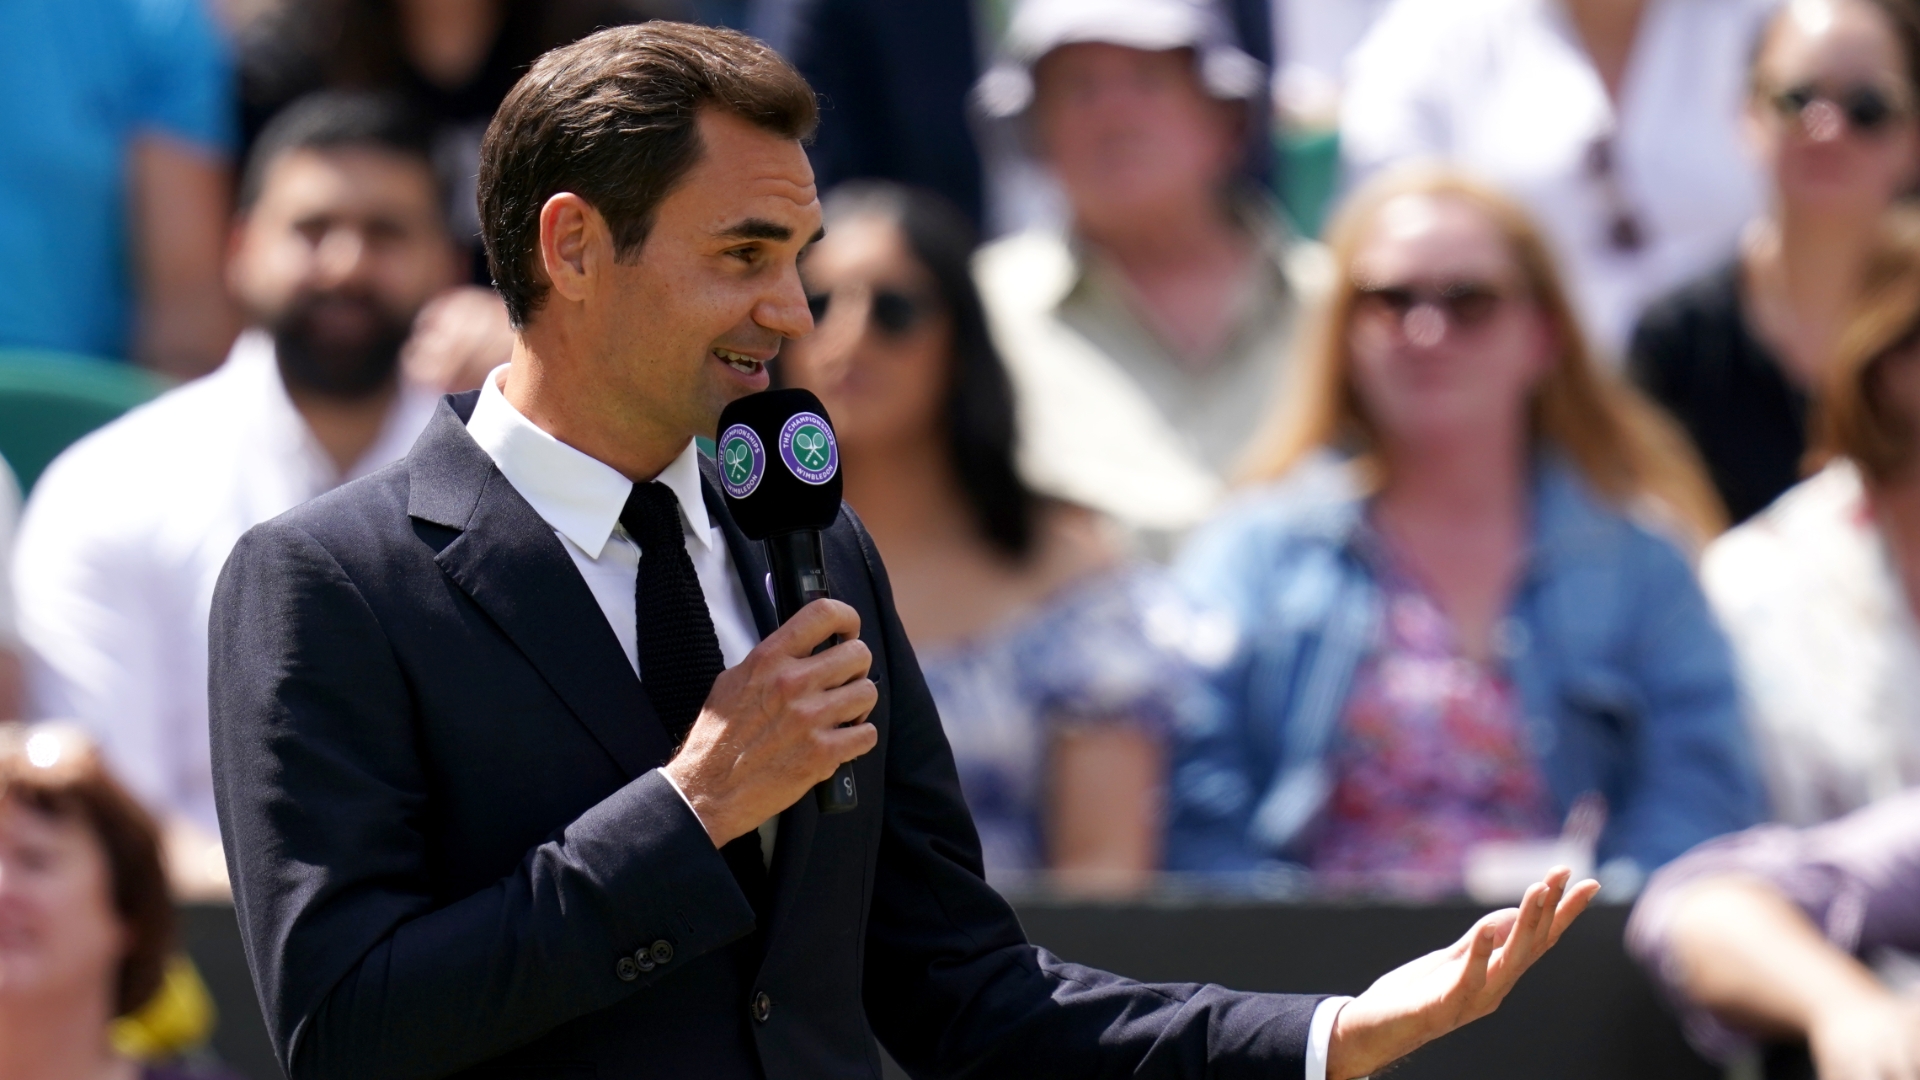 Federer gets massive ovation at Wimbledon, hopes to play Centre Court one more time - Stream the Video